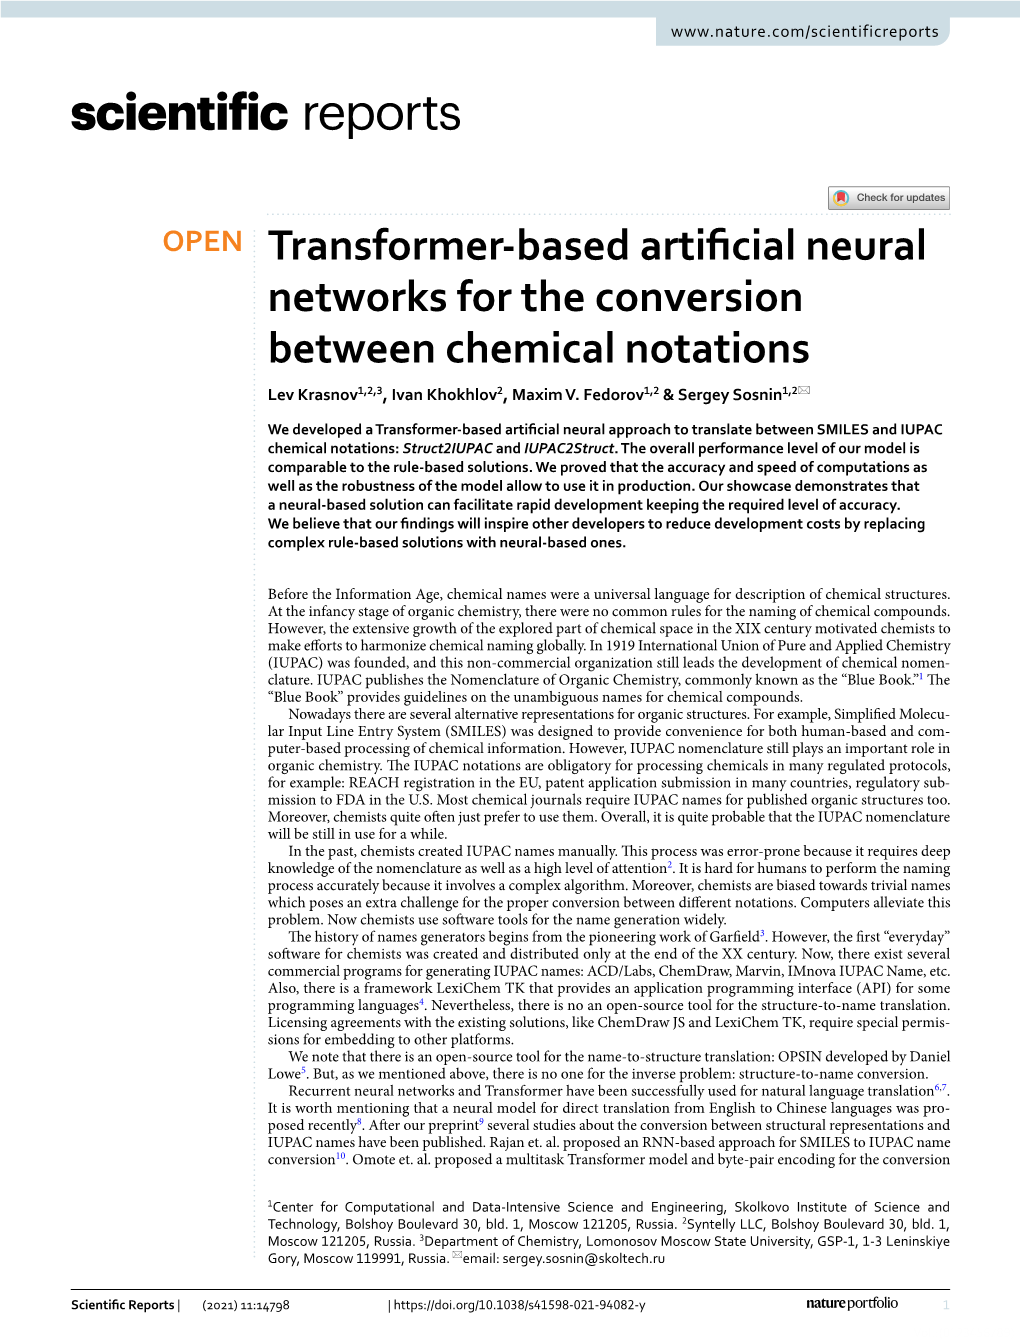 Transformer-Based Artificial Neural Networks for the Conversion